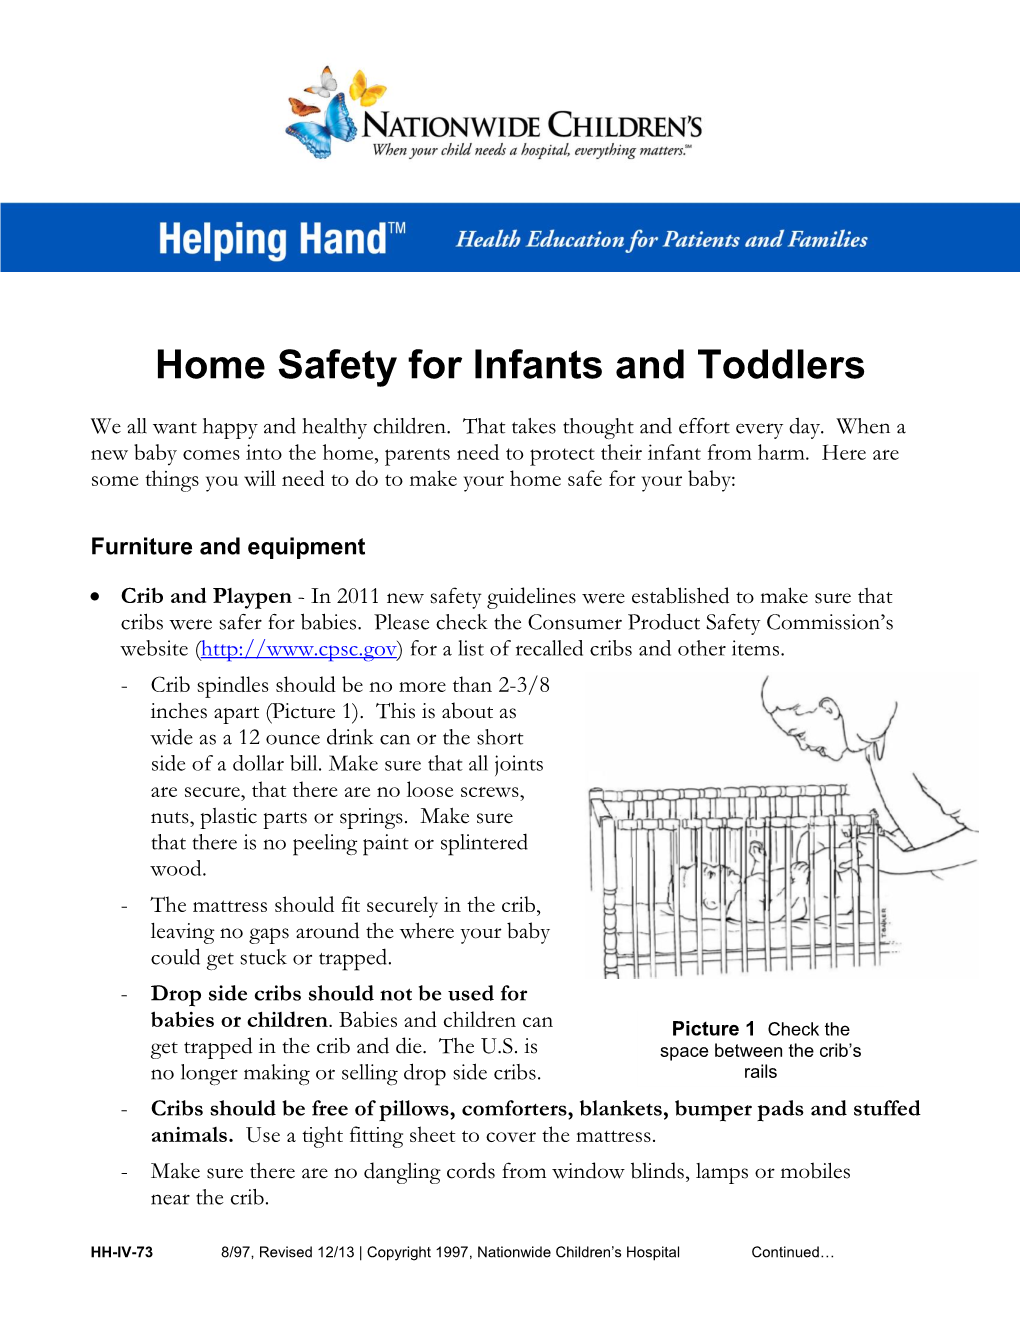 Home Safety for Infants and Toddlers (PDF)